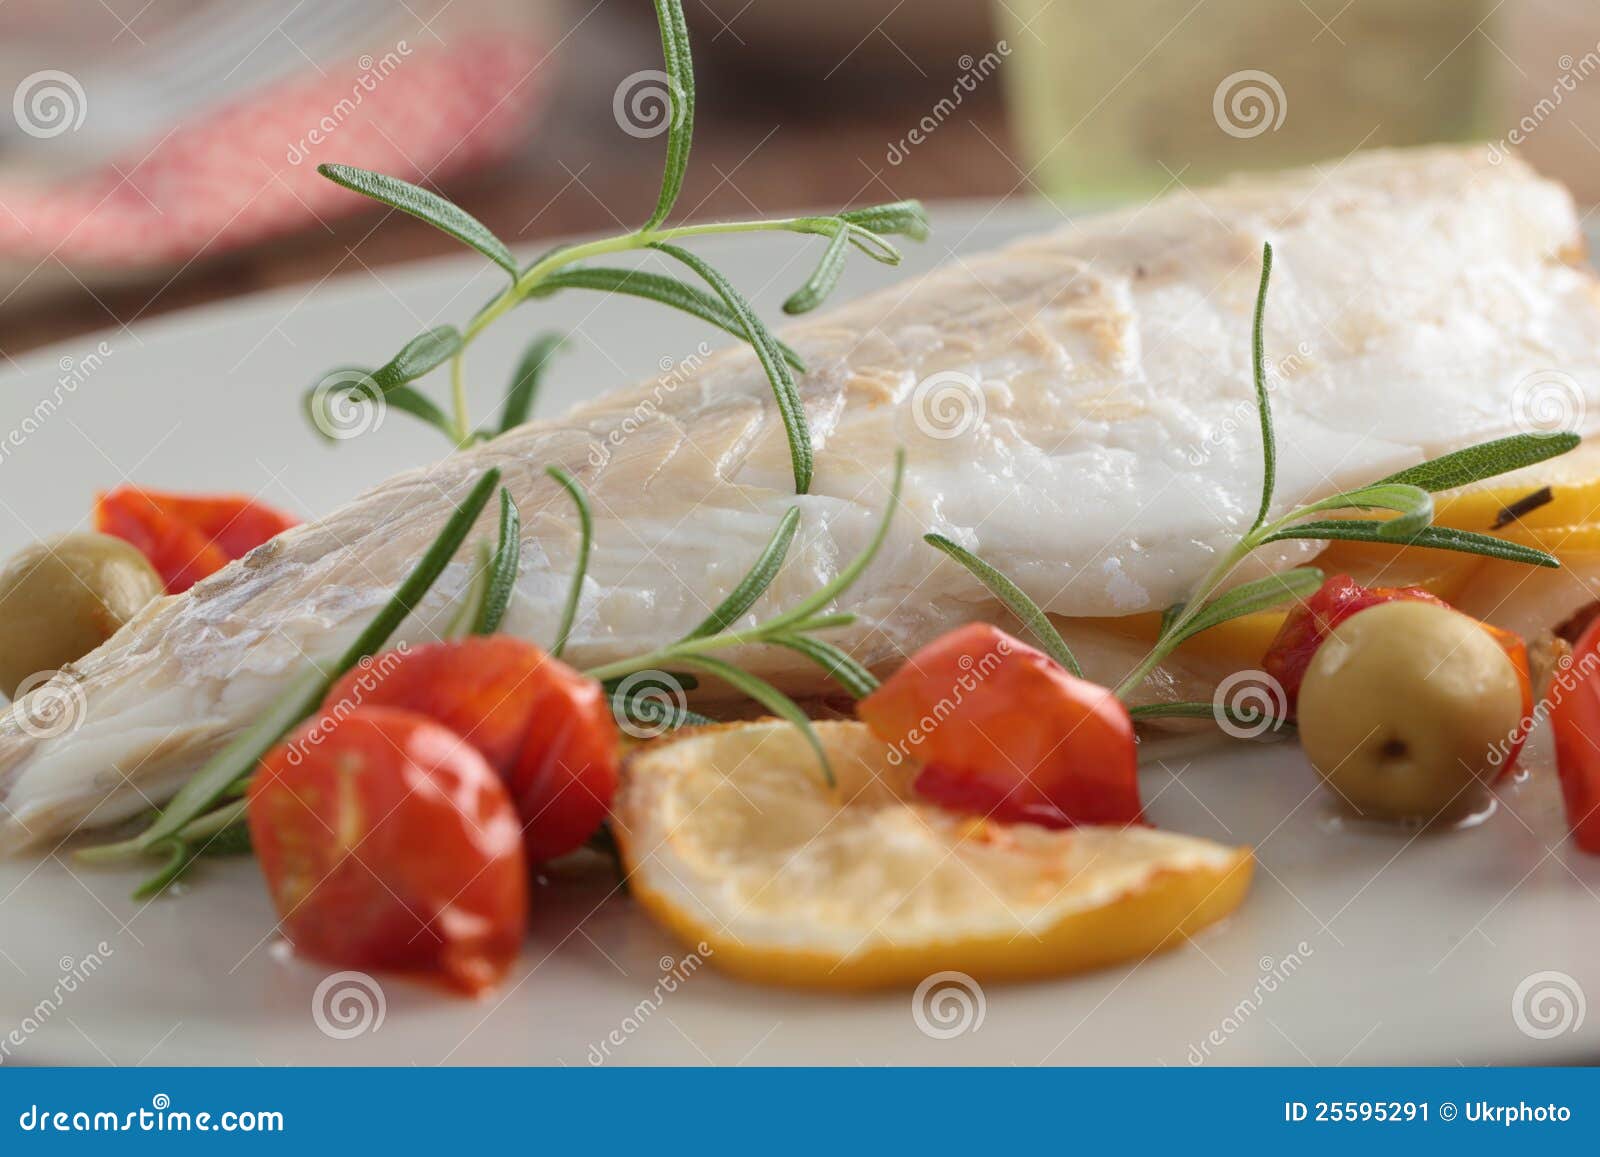 Baked Sea Bass With Vegetables Stock Image Image Of Green Food 25595291